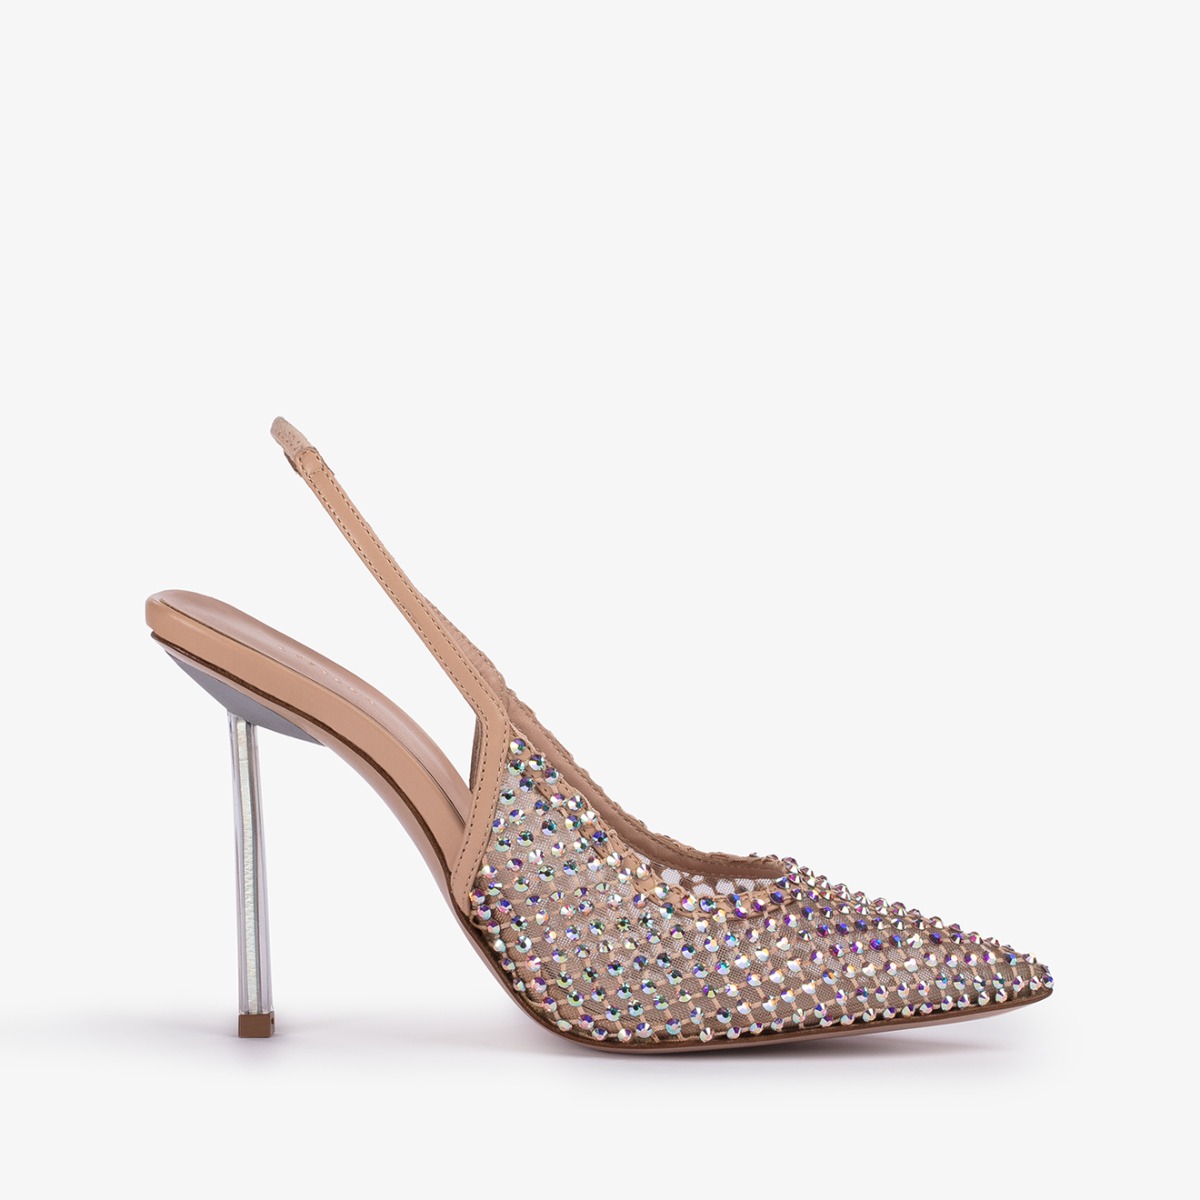 Skin nude fishnet slingback with Crystals - Le Silla